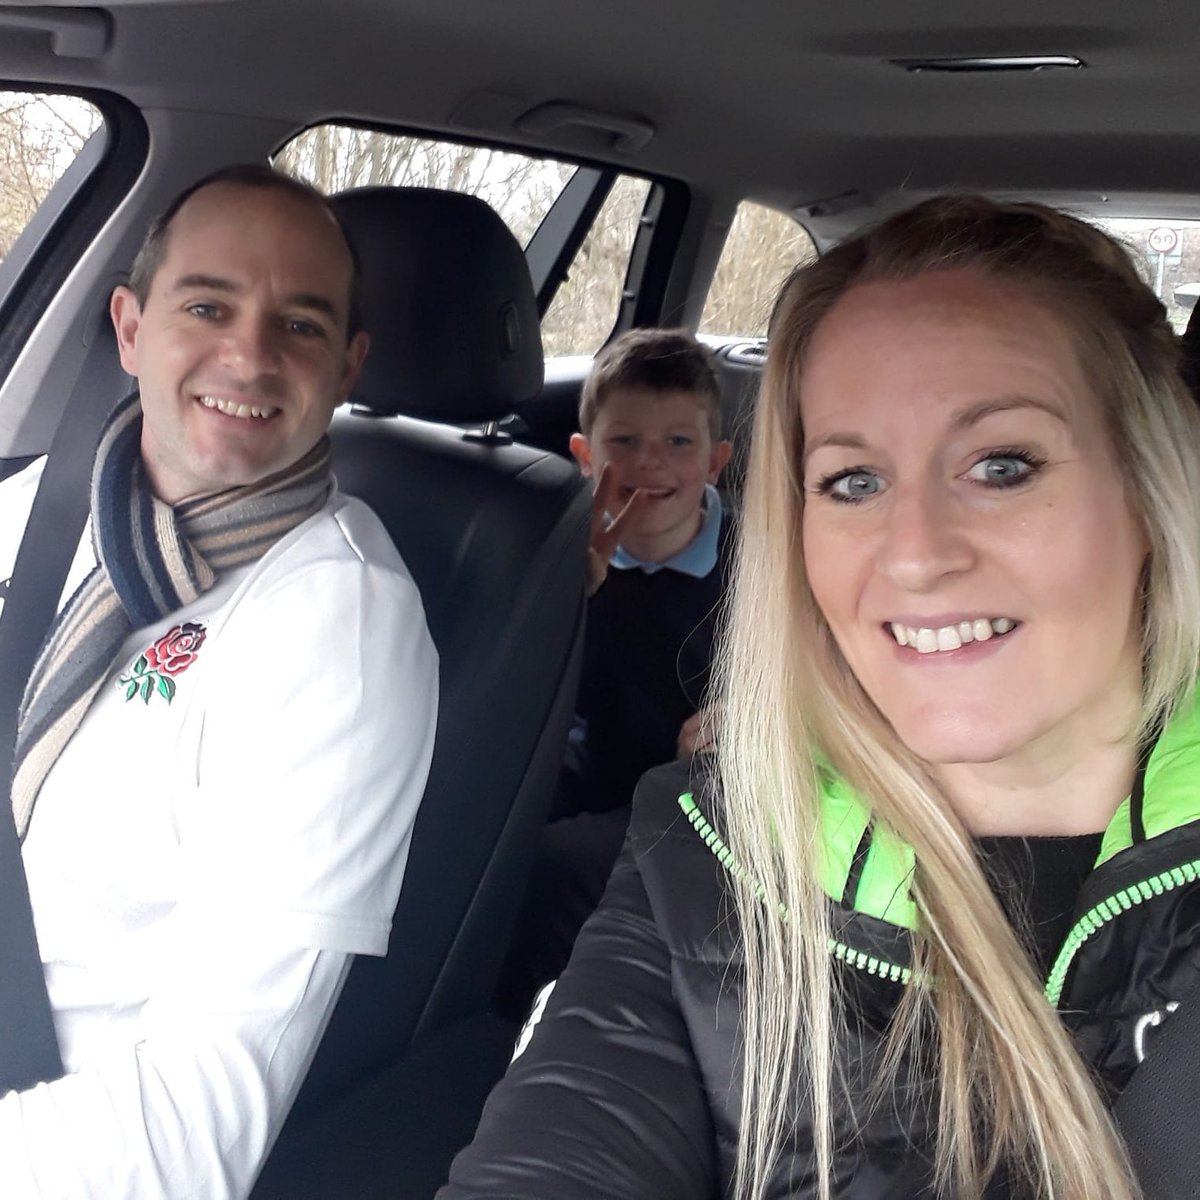 Exciting car full to see #8thcelebrity @EnglandRugby star @Mark_wils610 for #100handsagainstcancer! @crafty_cup #fundraising @CR_UK #beatcancer